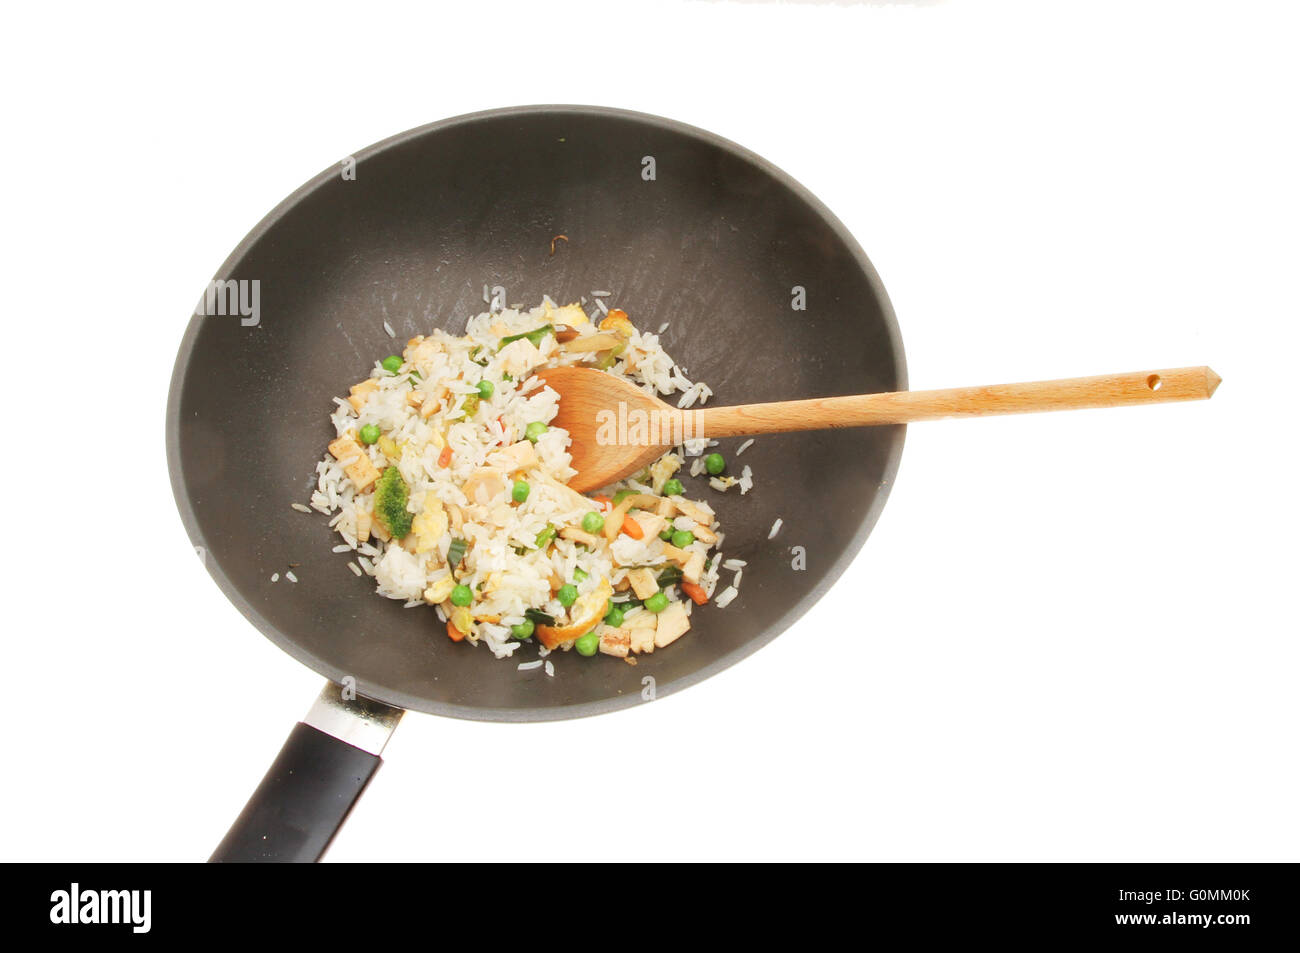 Fried rice in a wok with a wooden spoon isolated against white Stock Photo